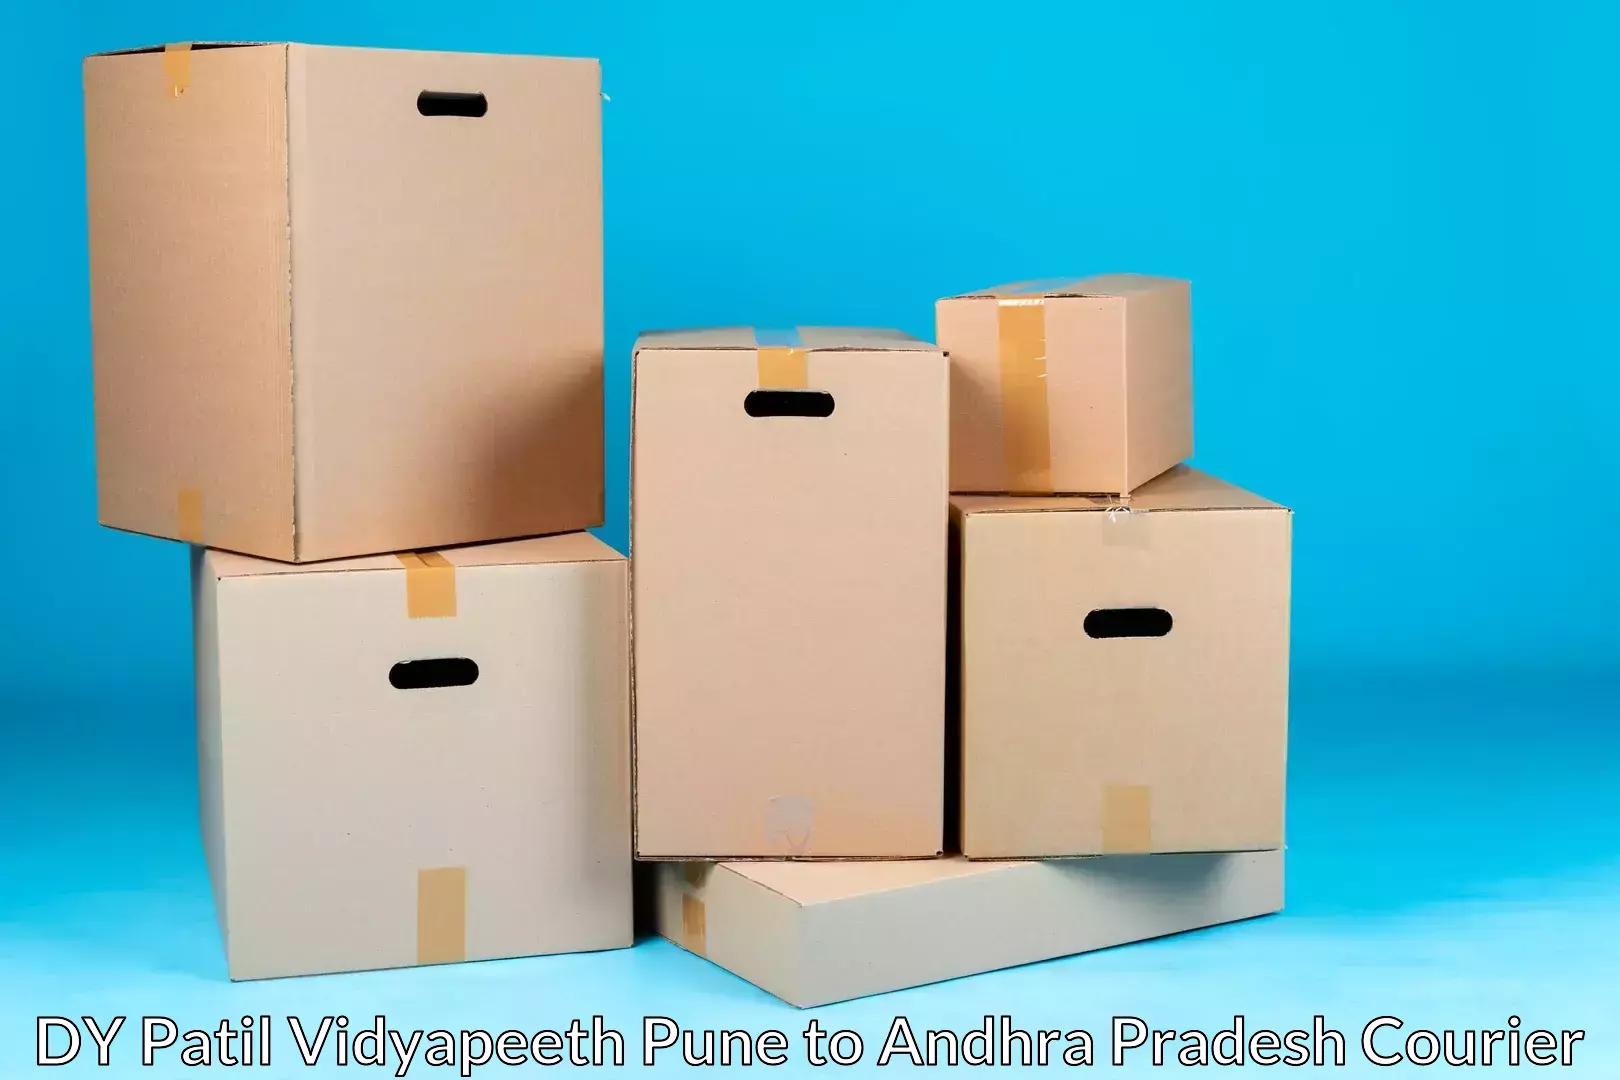 Trusted relocation services DY Patil Vidyapeeth Pune to Visakhapatnam Port